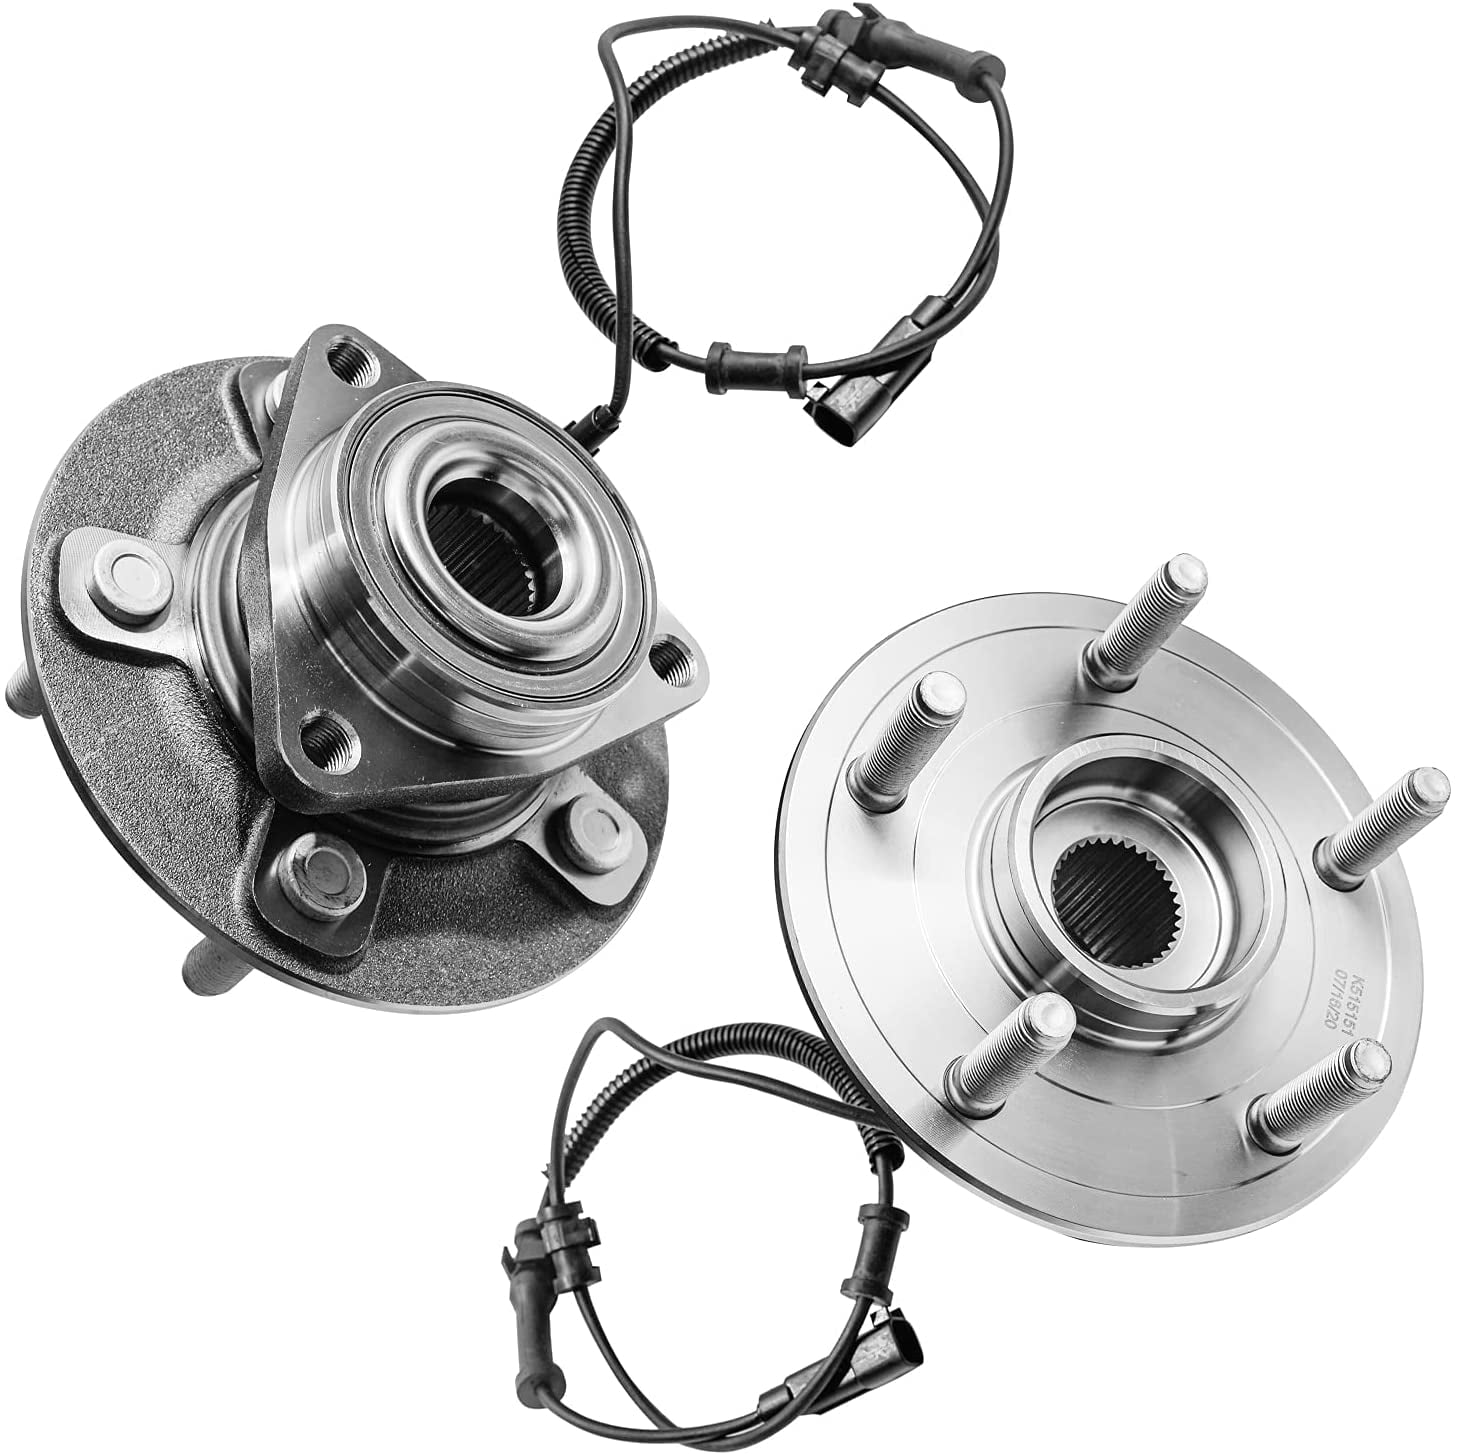 Detroit Axle Front Wheel Bearing And Hubs For 2012-2018, 51% OFF